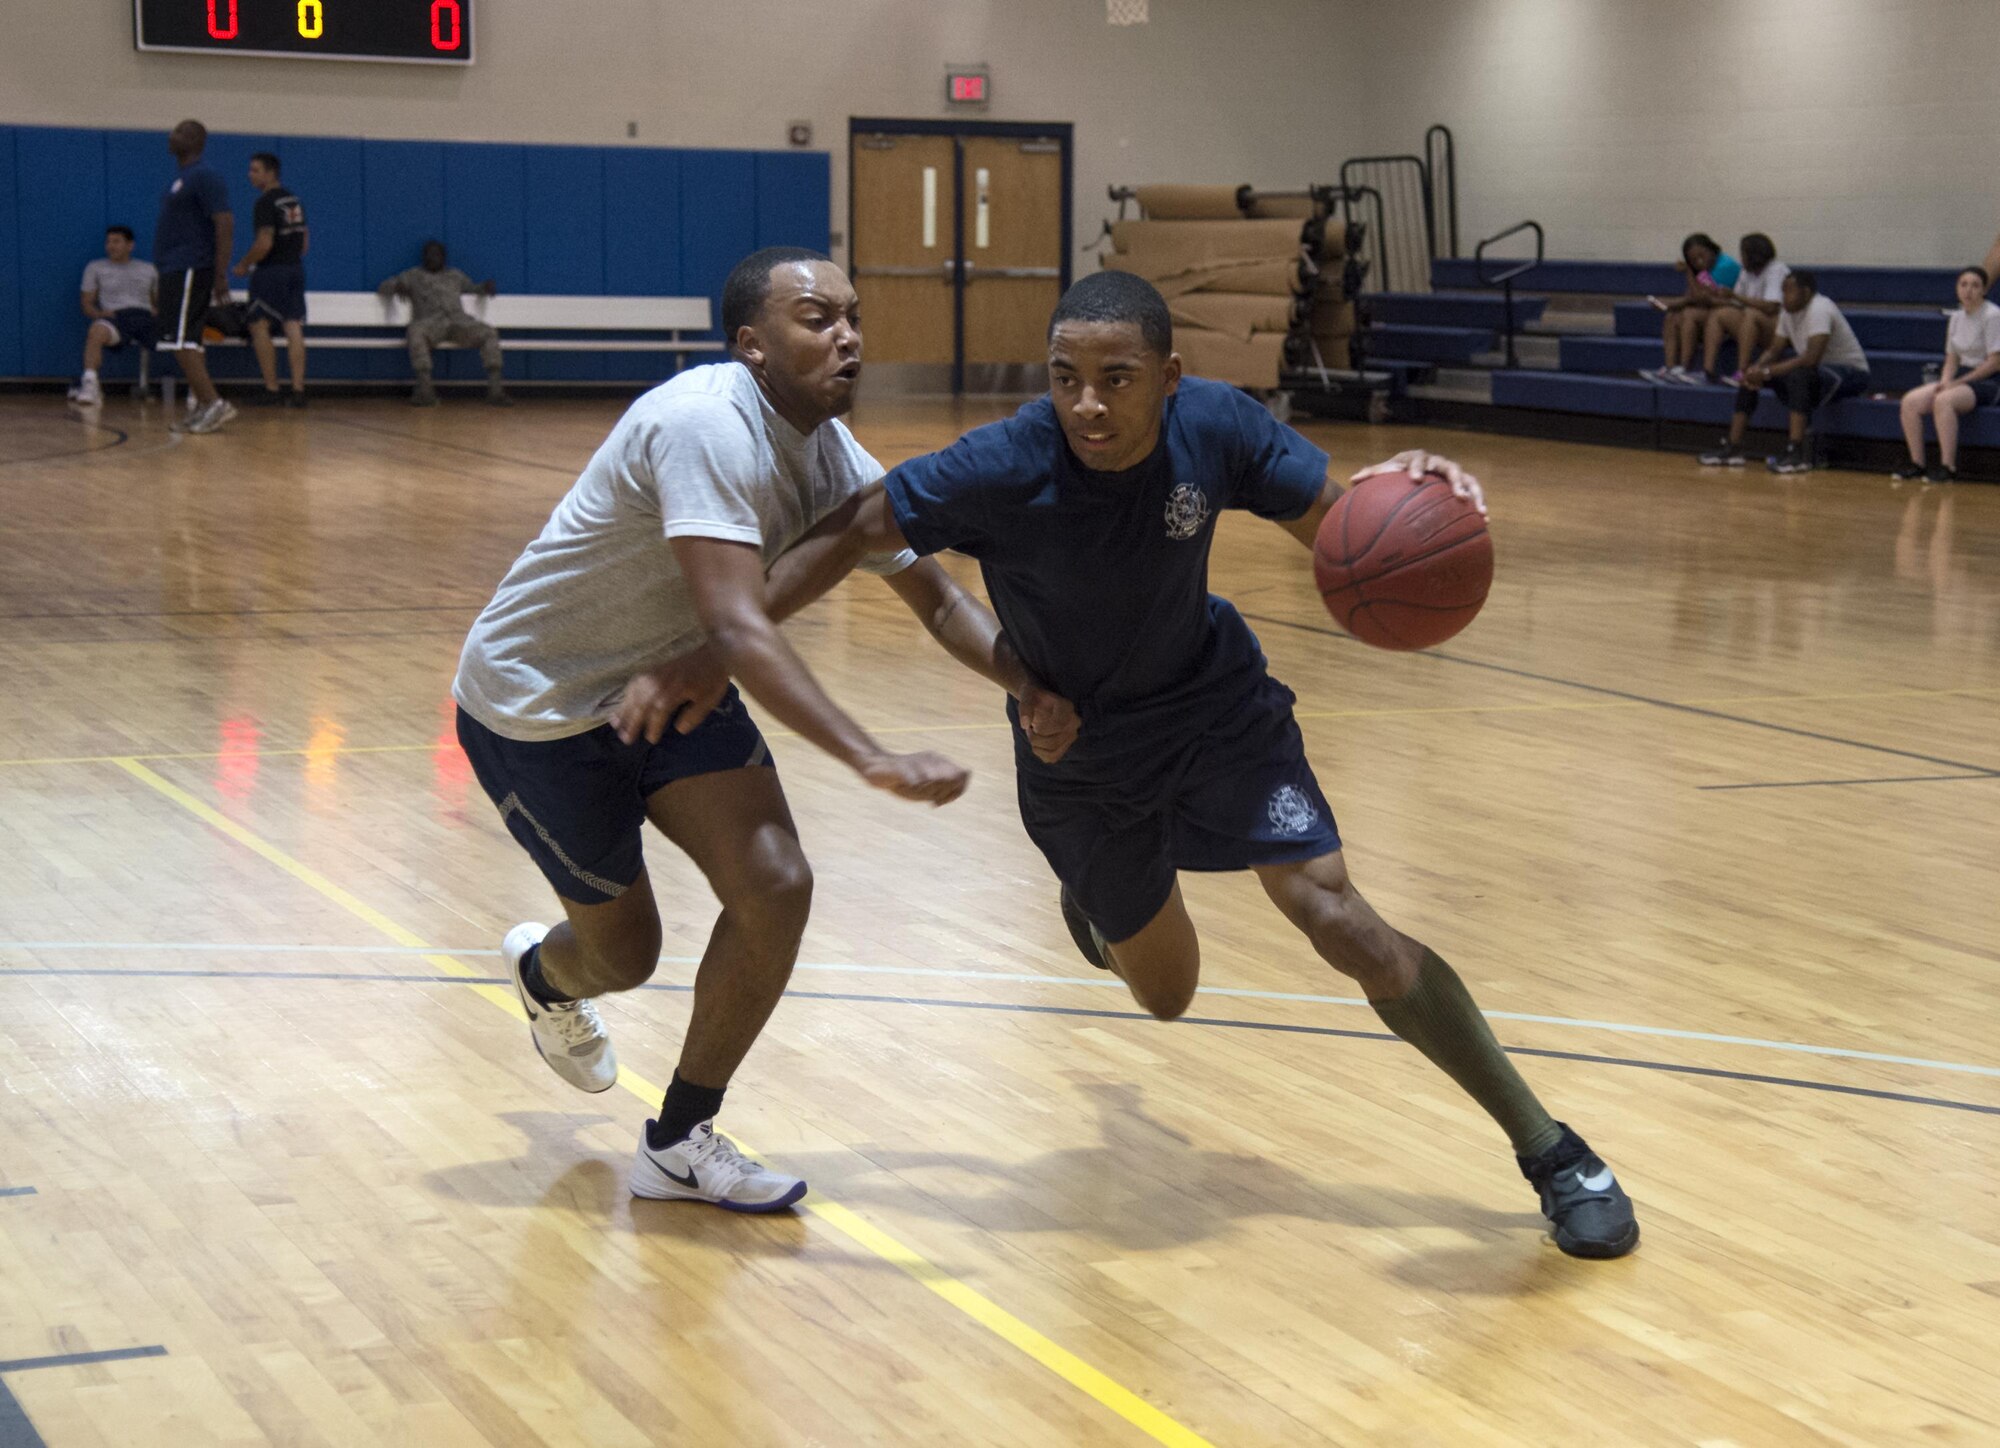 U.S. Air Force Airman Basic Tyrell Thompson, 23d Civil Engineer Squadron firefighter, blows past a defender during Sports Day, June 17, 2016, at Moody Air Force Base, Ga. During the game, the 23d CES took on the 23d Force Support Squadron, battling it out for third place. (U.S. Air Force photo by Airman 1st Class Janiqua P. Robinson/Released)